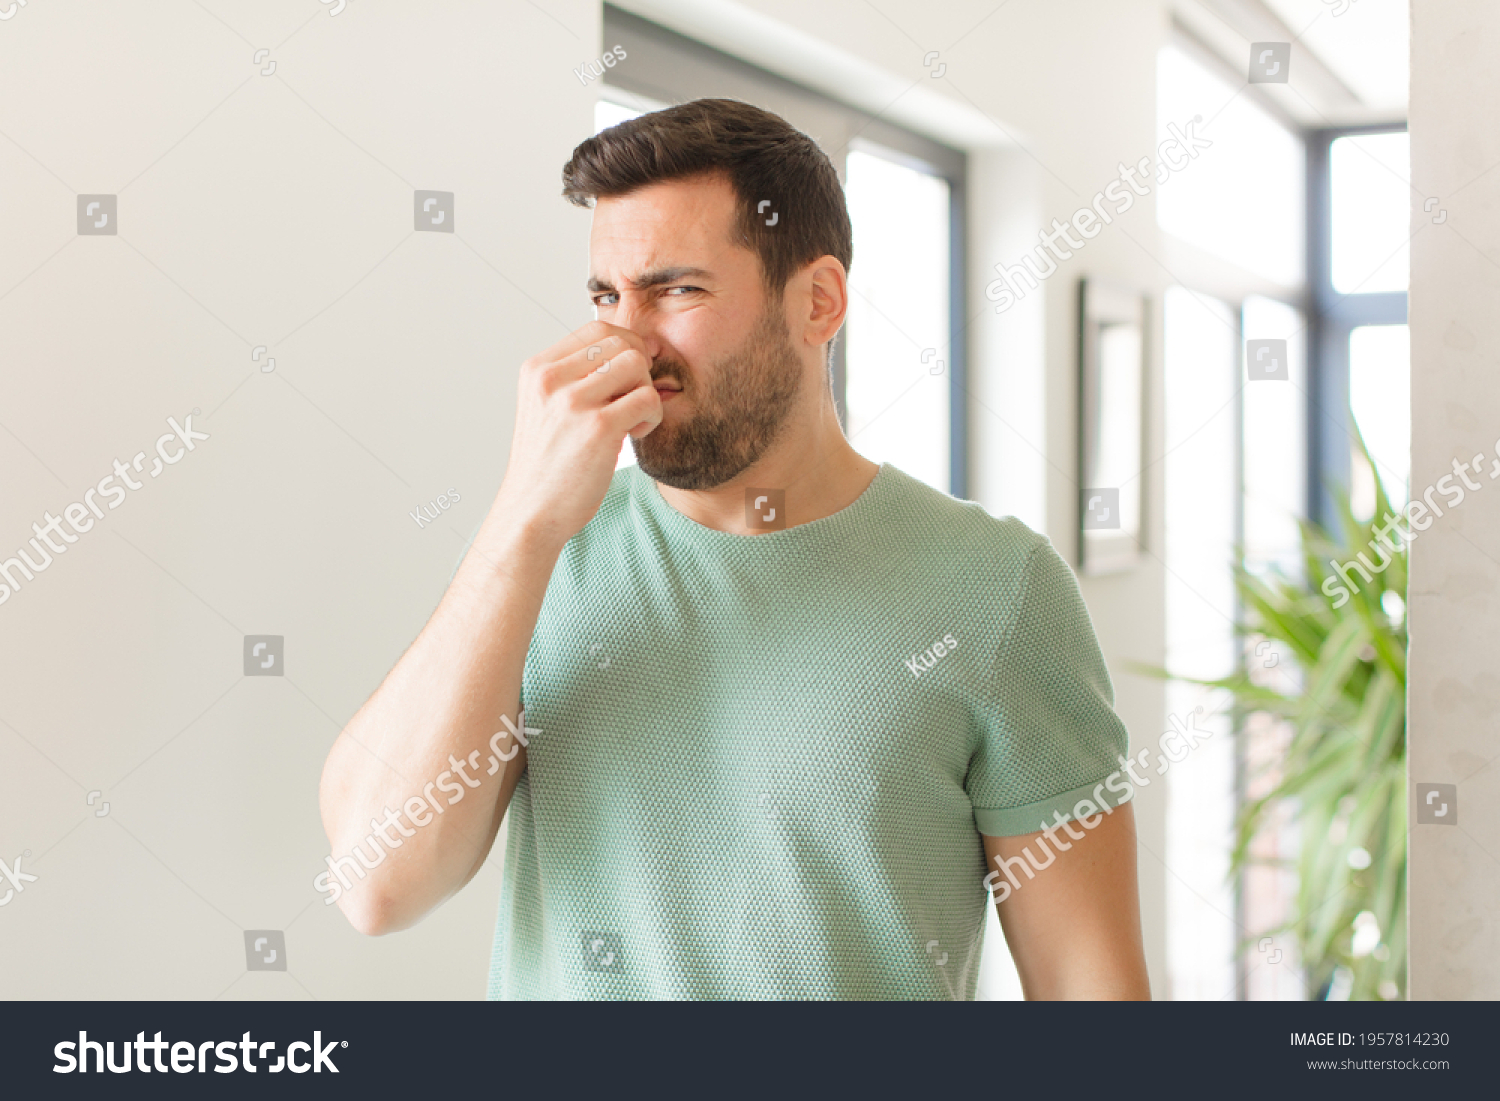 handsome man feeling disgusted, holding nose to avoid smelling a foul and unpleasant stench #1957814230